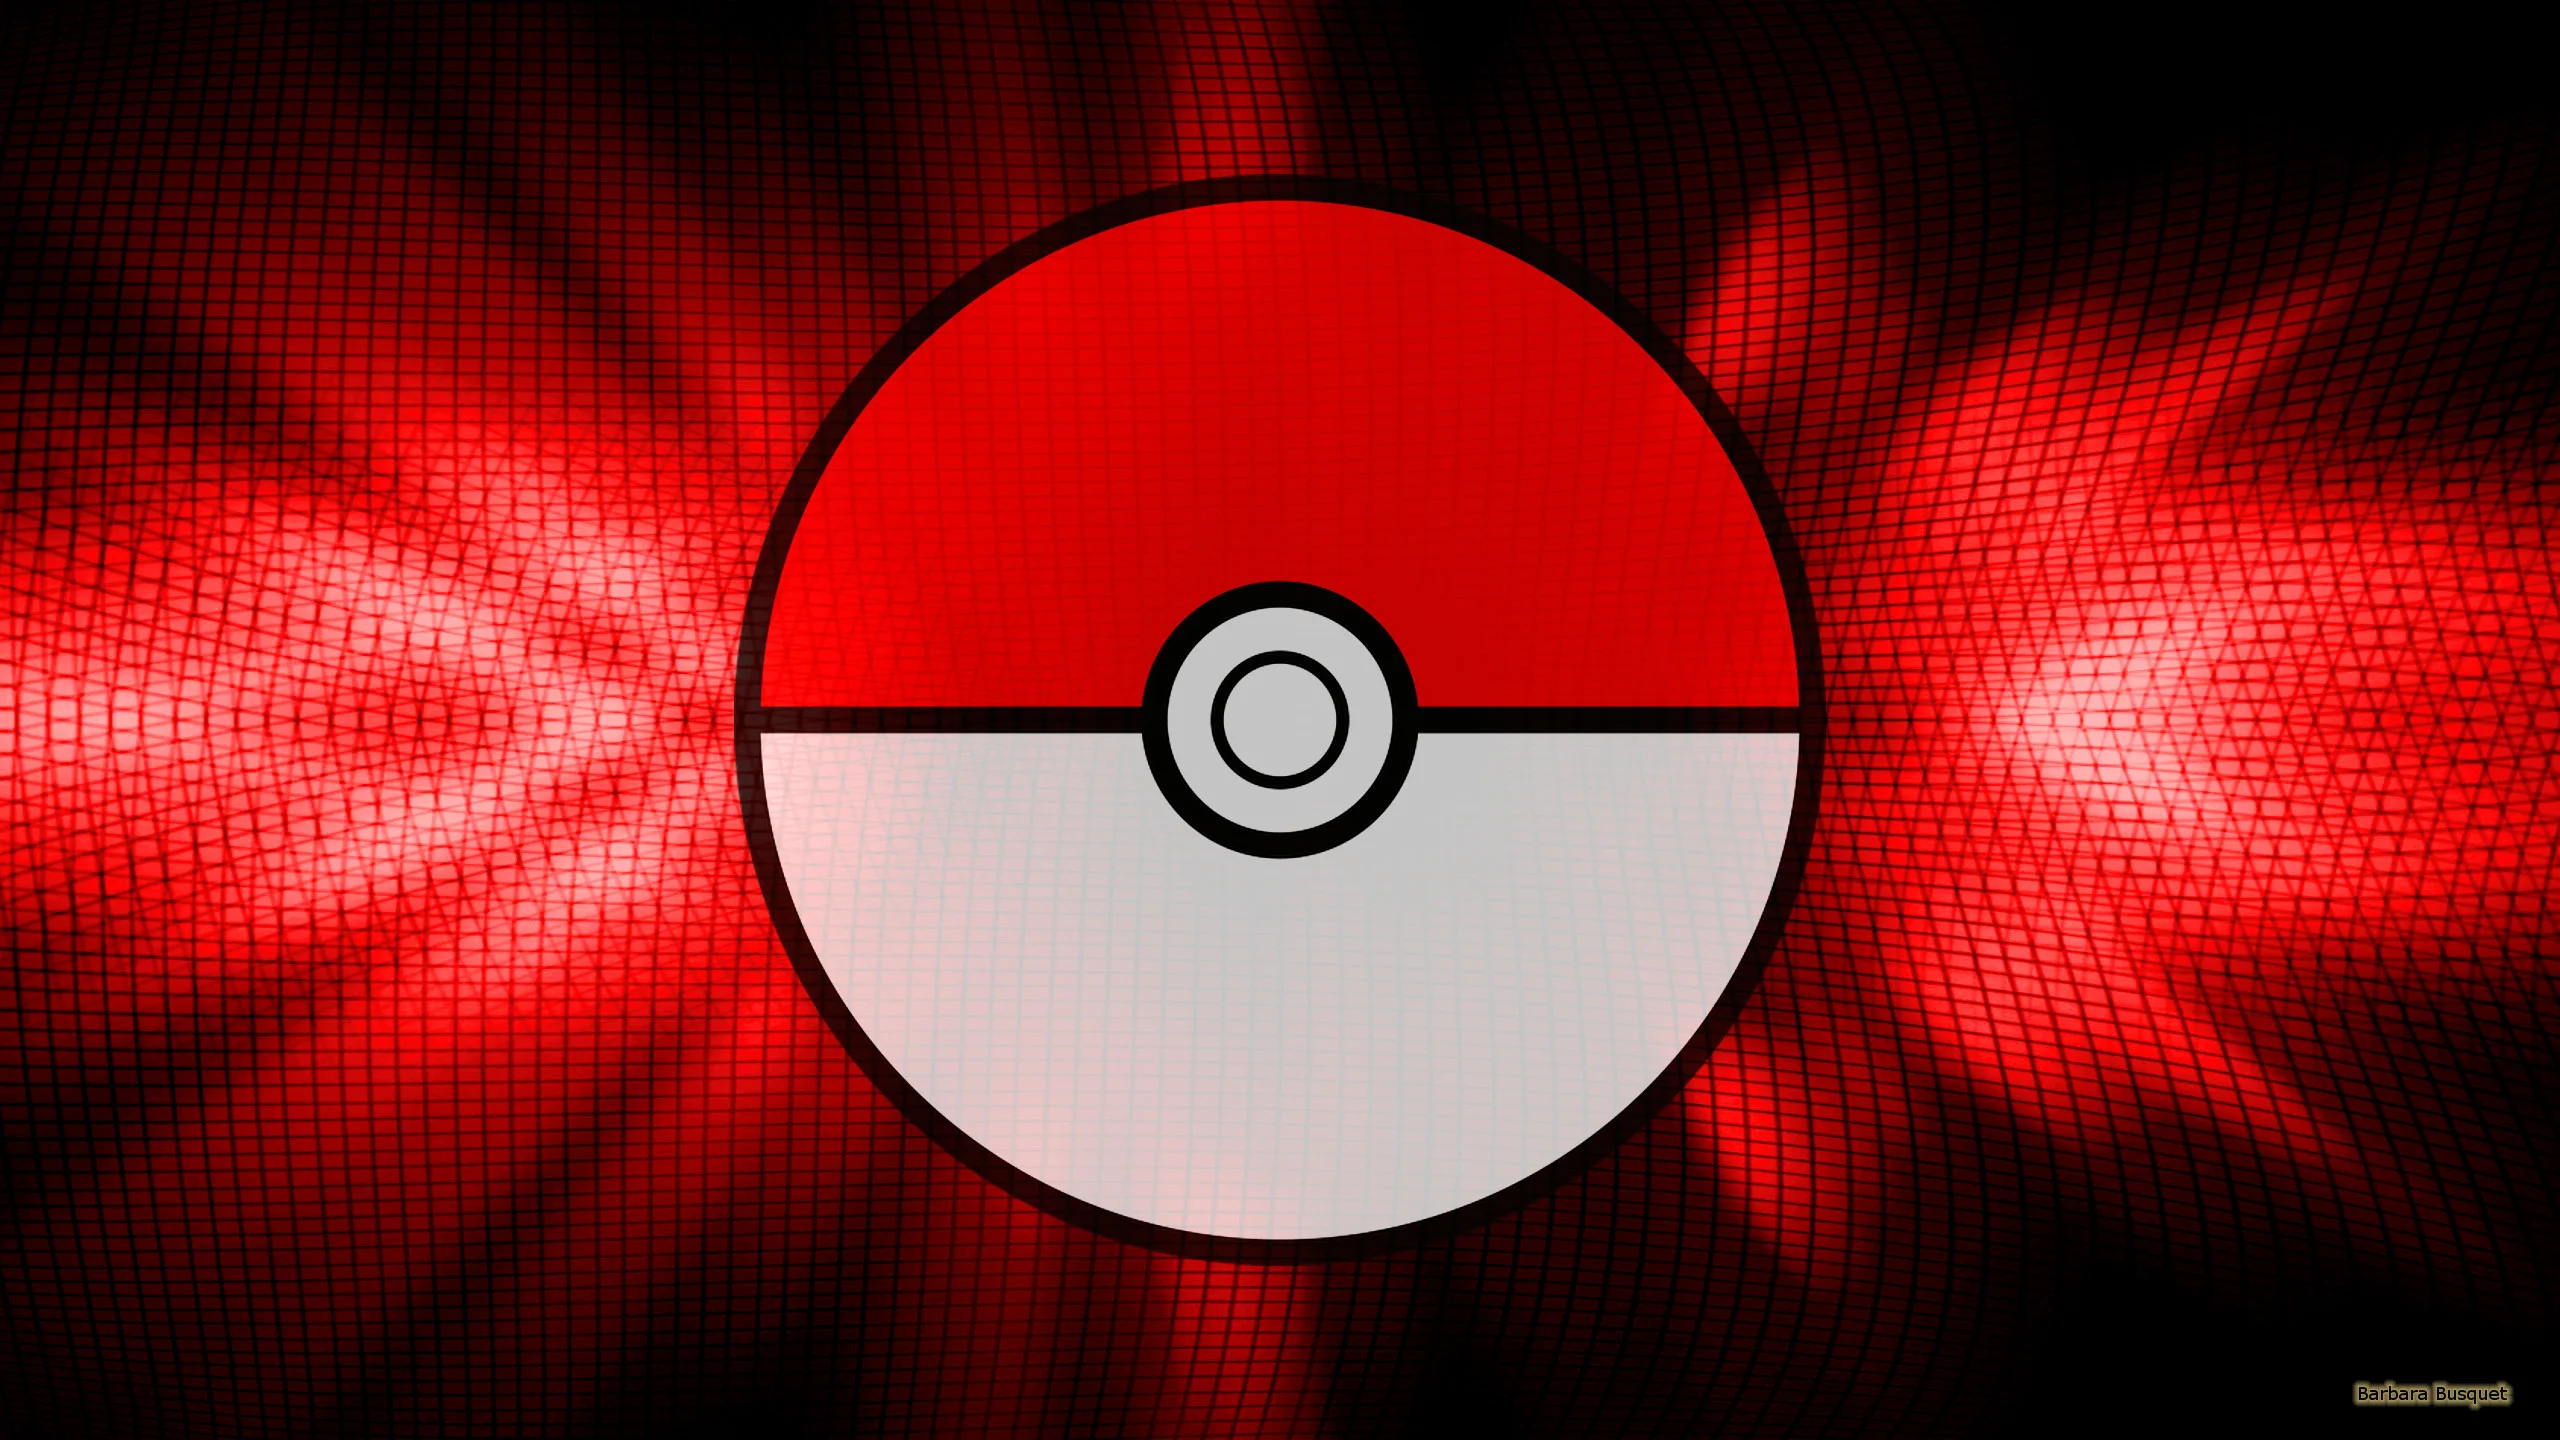 Black red Pokemon GO wallpaper with a pokeball